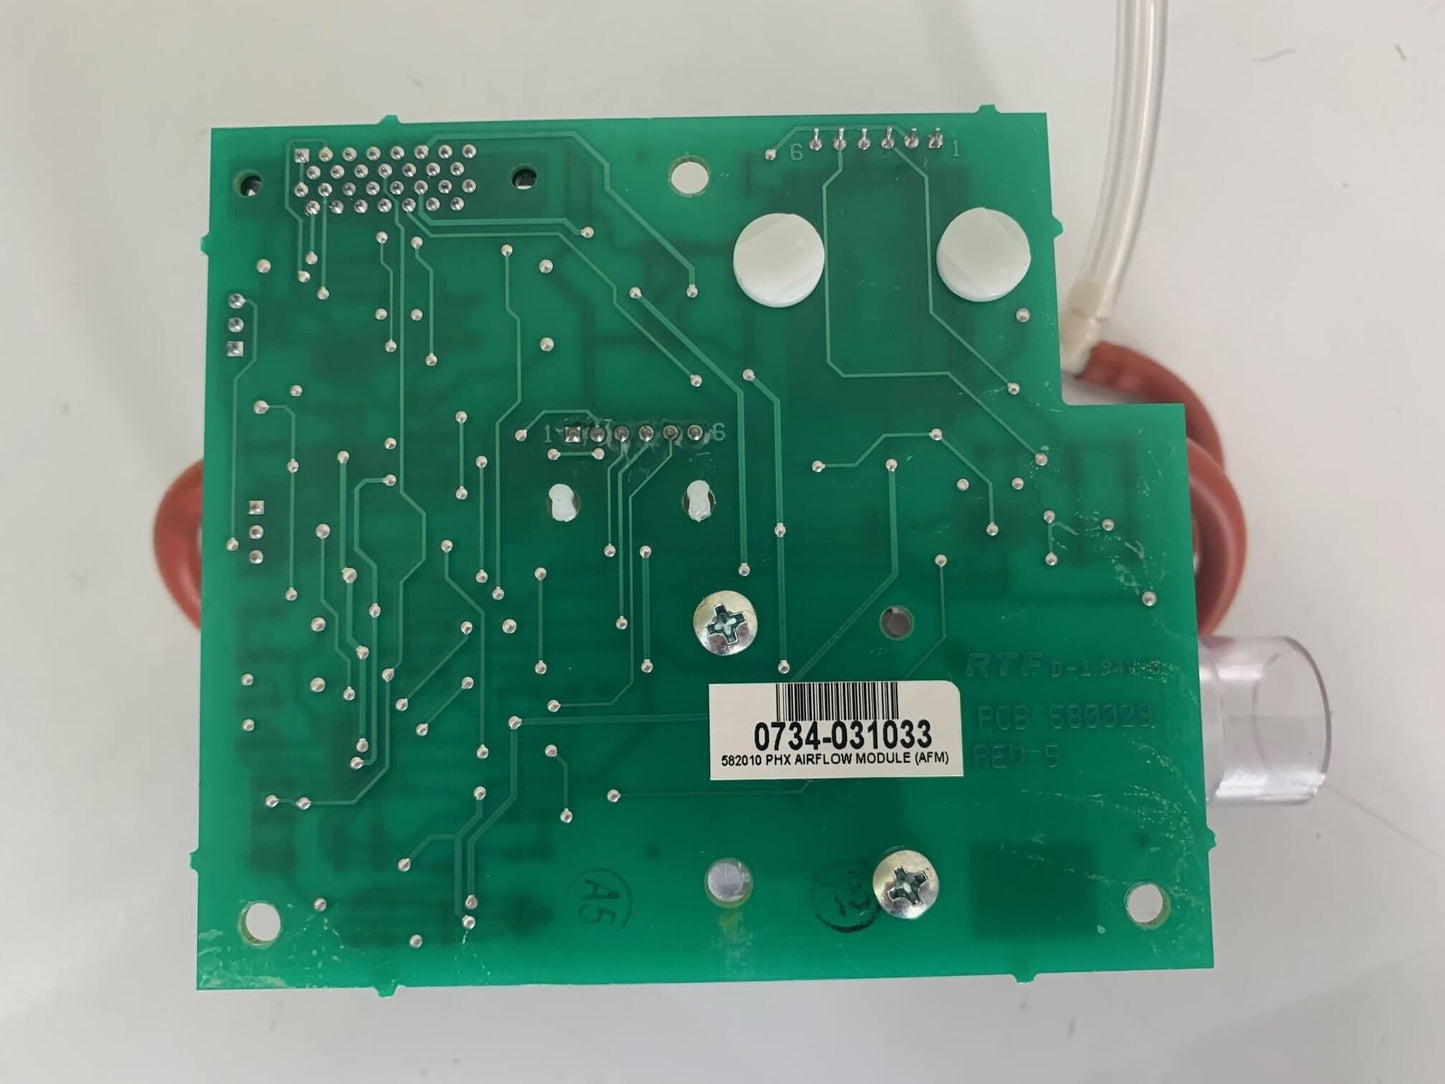 USED Phillips Respironics Replacement PHX Airflow Module PCB Board For BiPAP Vision Ventilator 580029 with FREE Shipping & Warranty - MBR Medicals